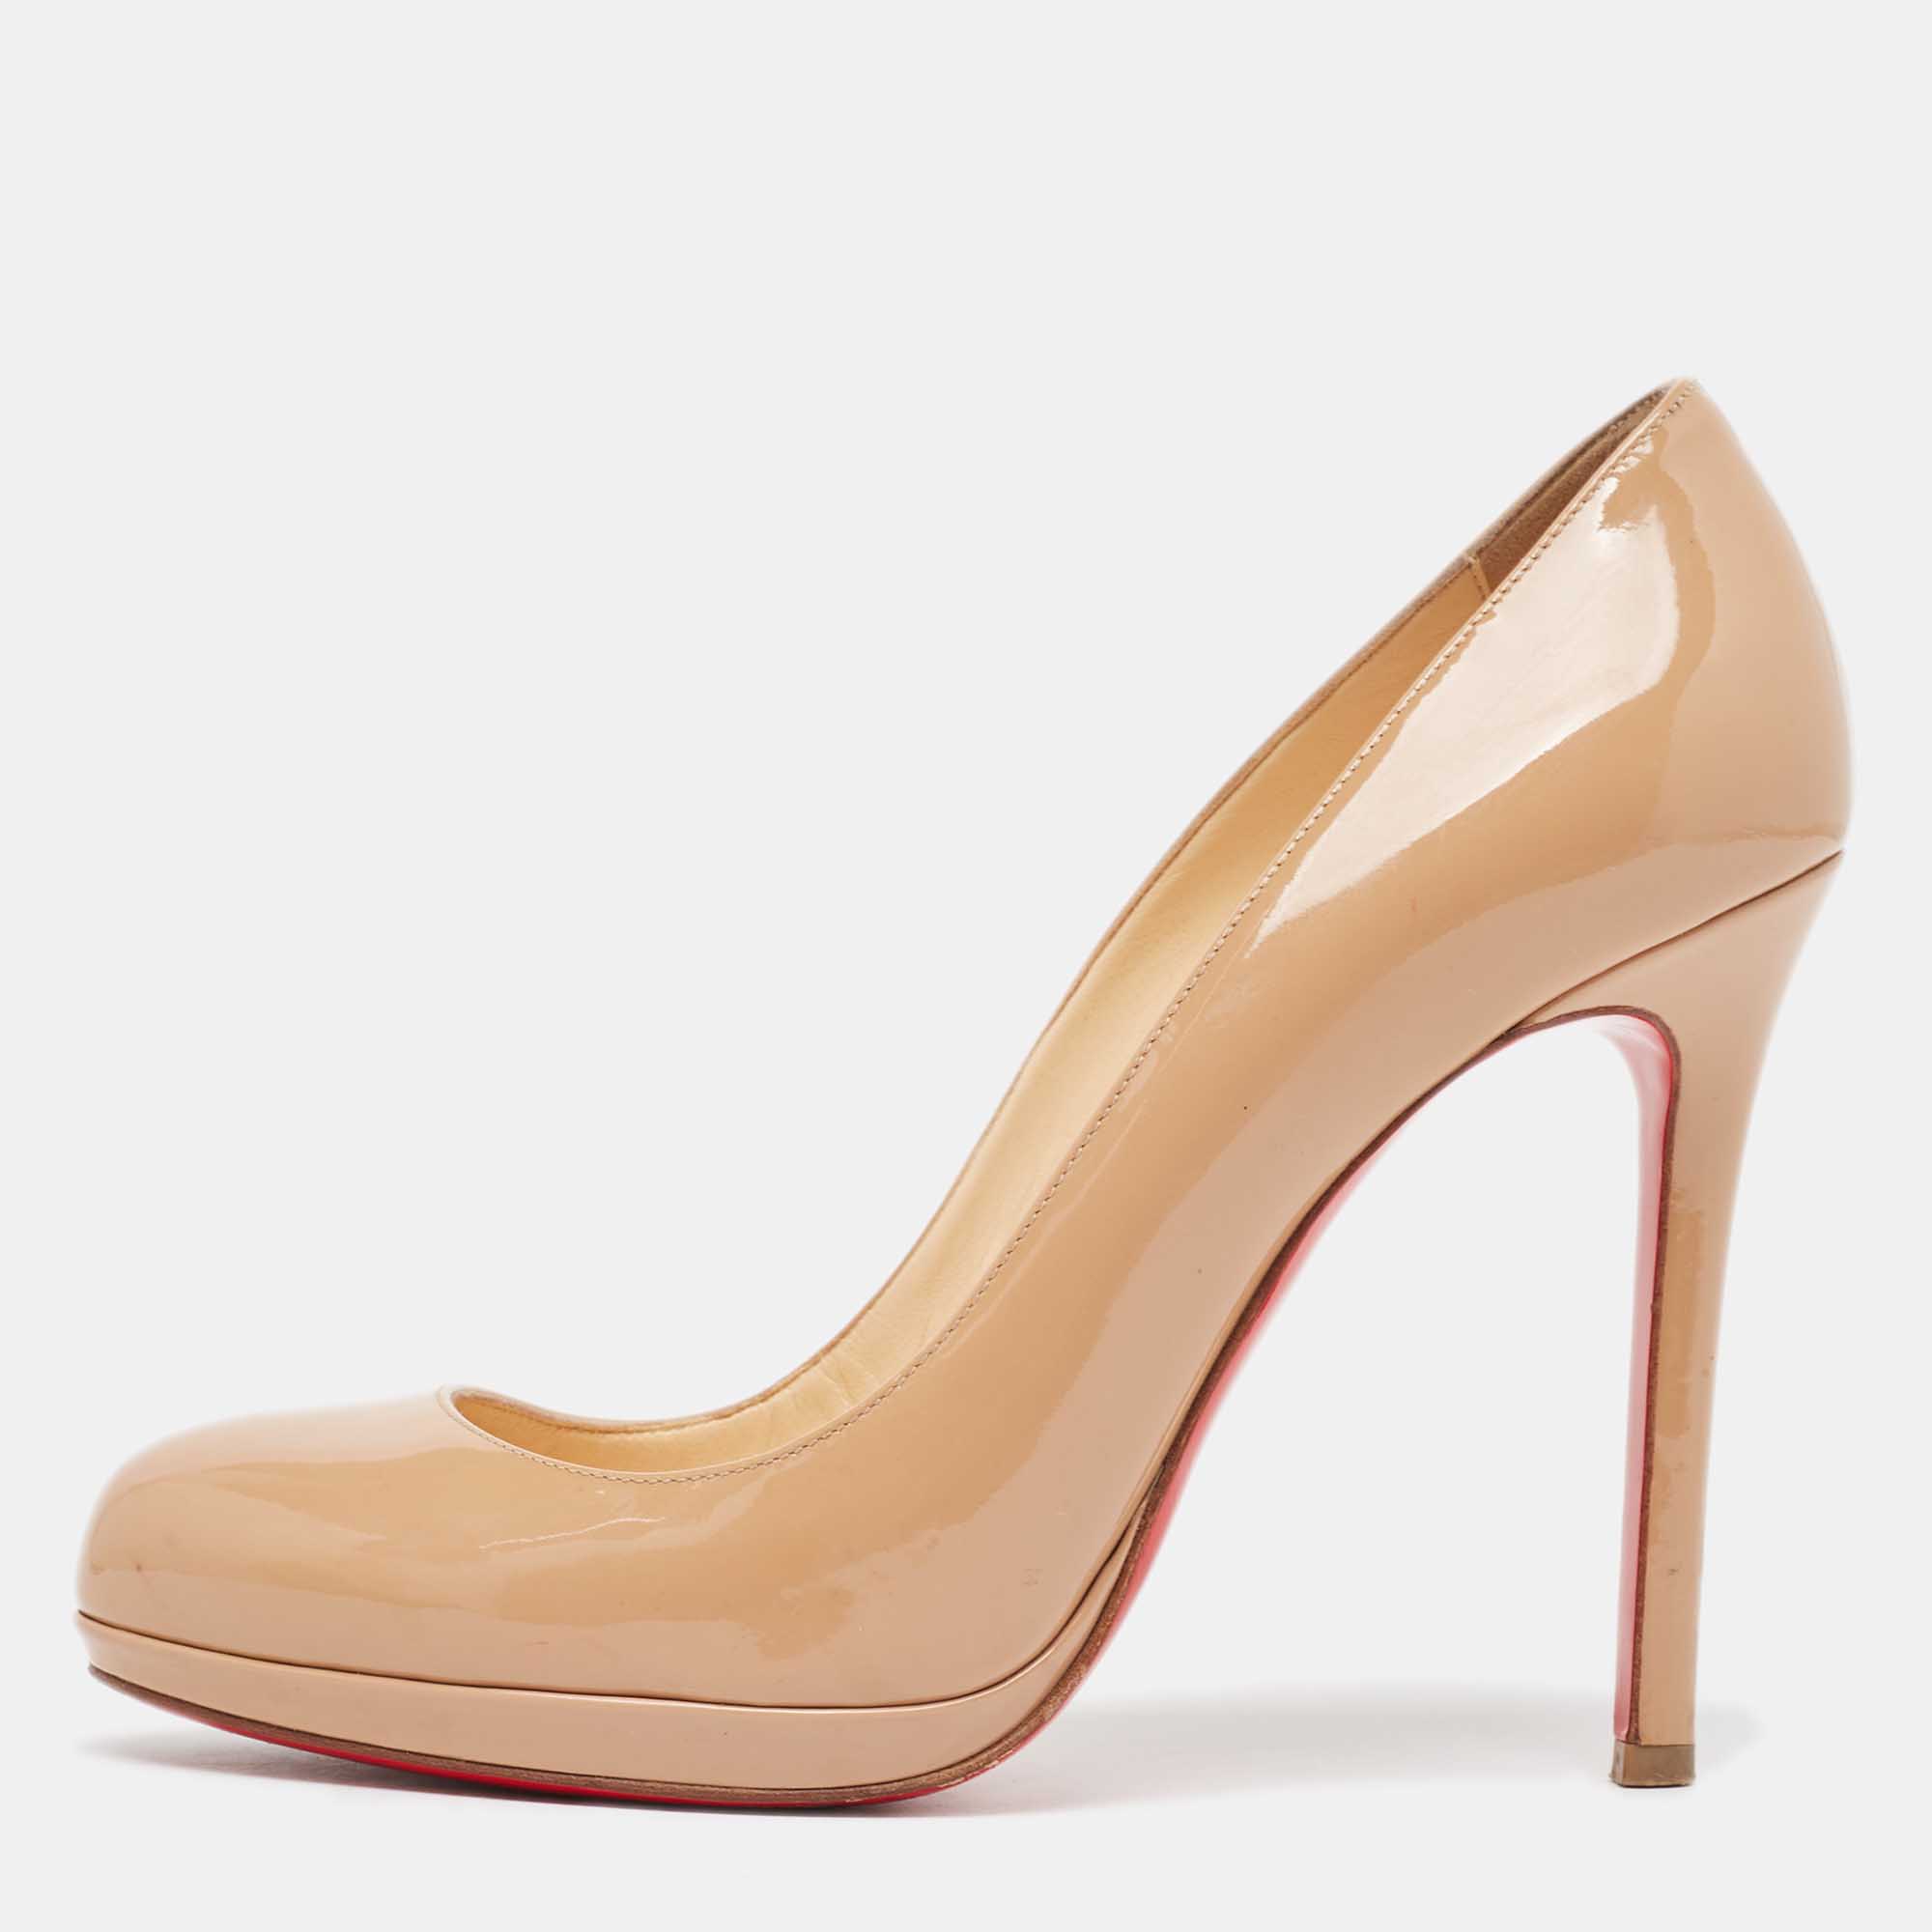 

Christian Louboutin Beige Patent Leather New Simple Round Toe Pumps Size